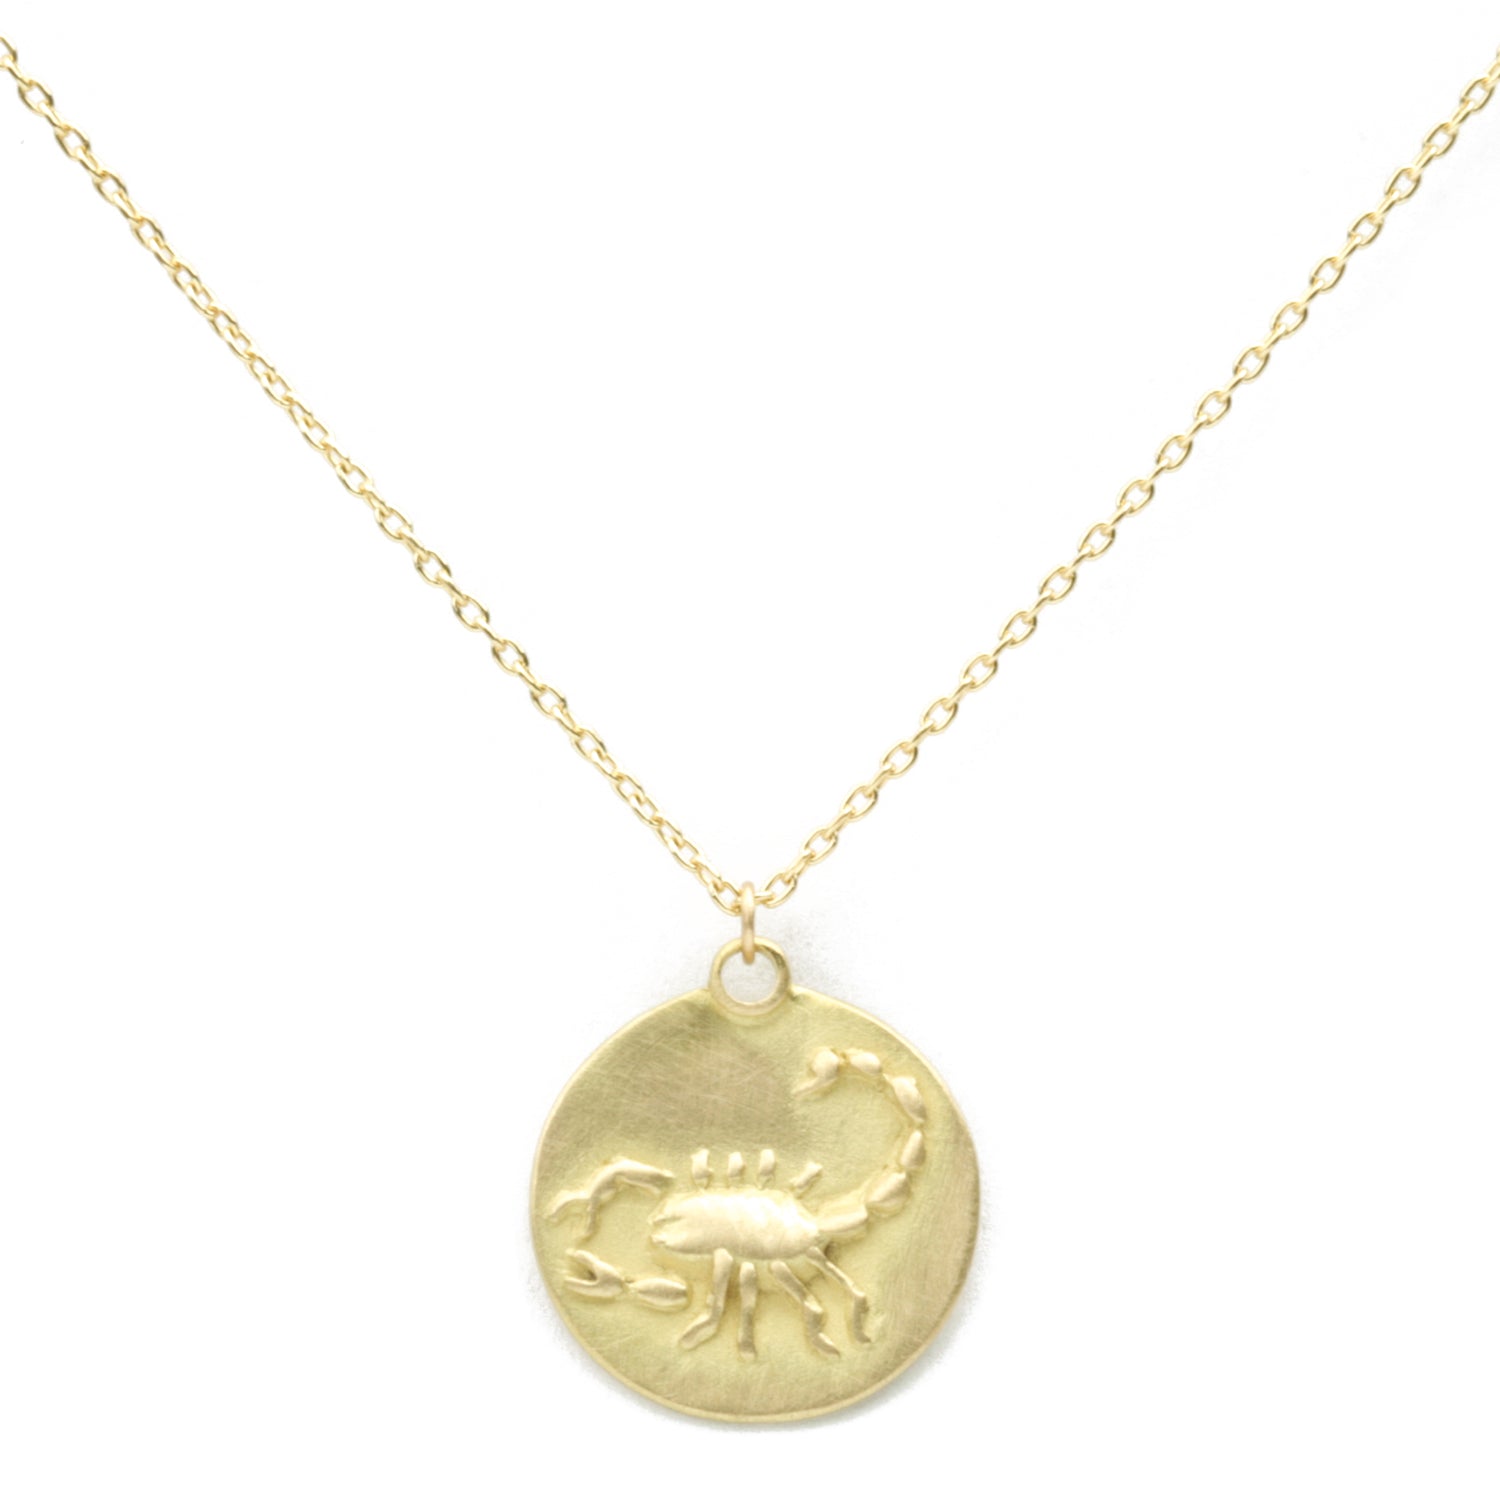 Scorpio Medal with cable chain